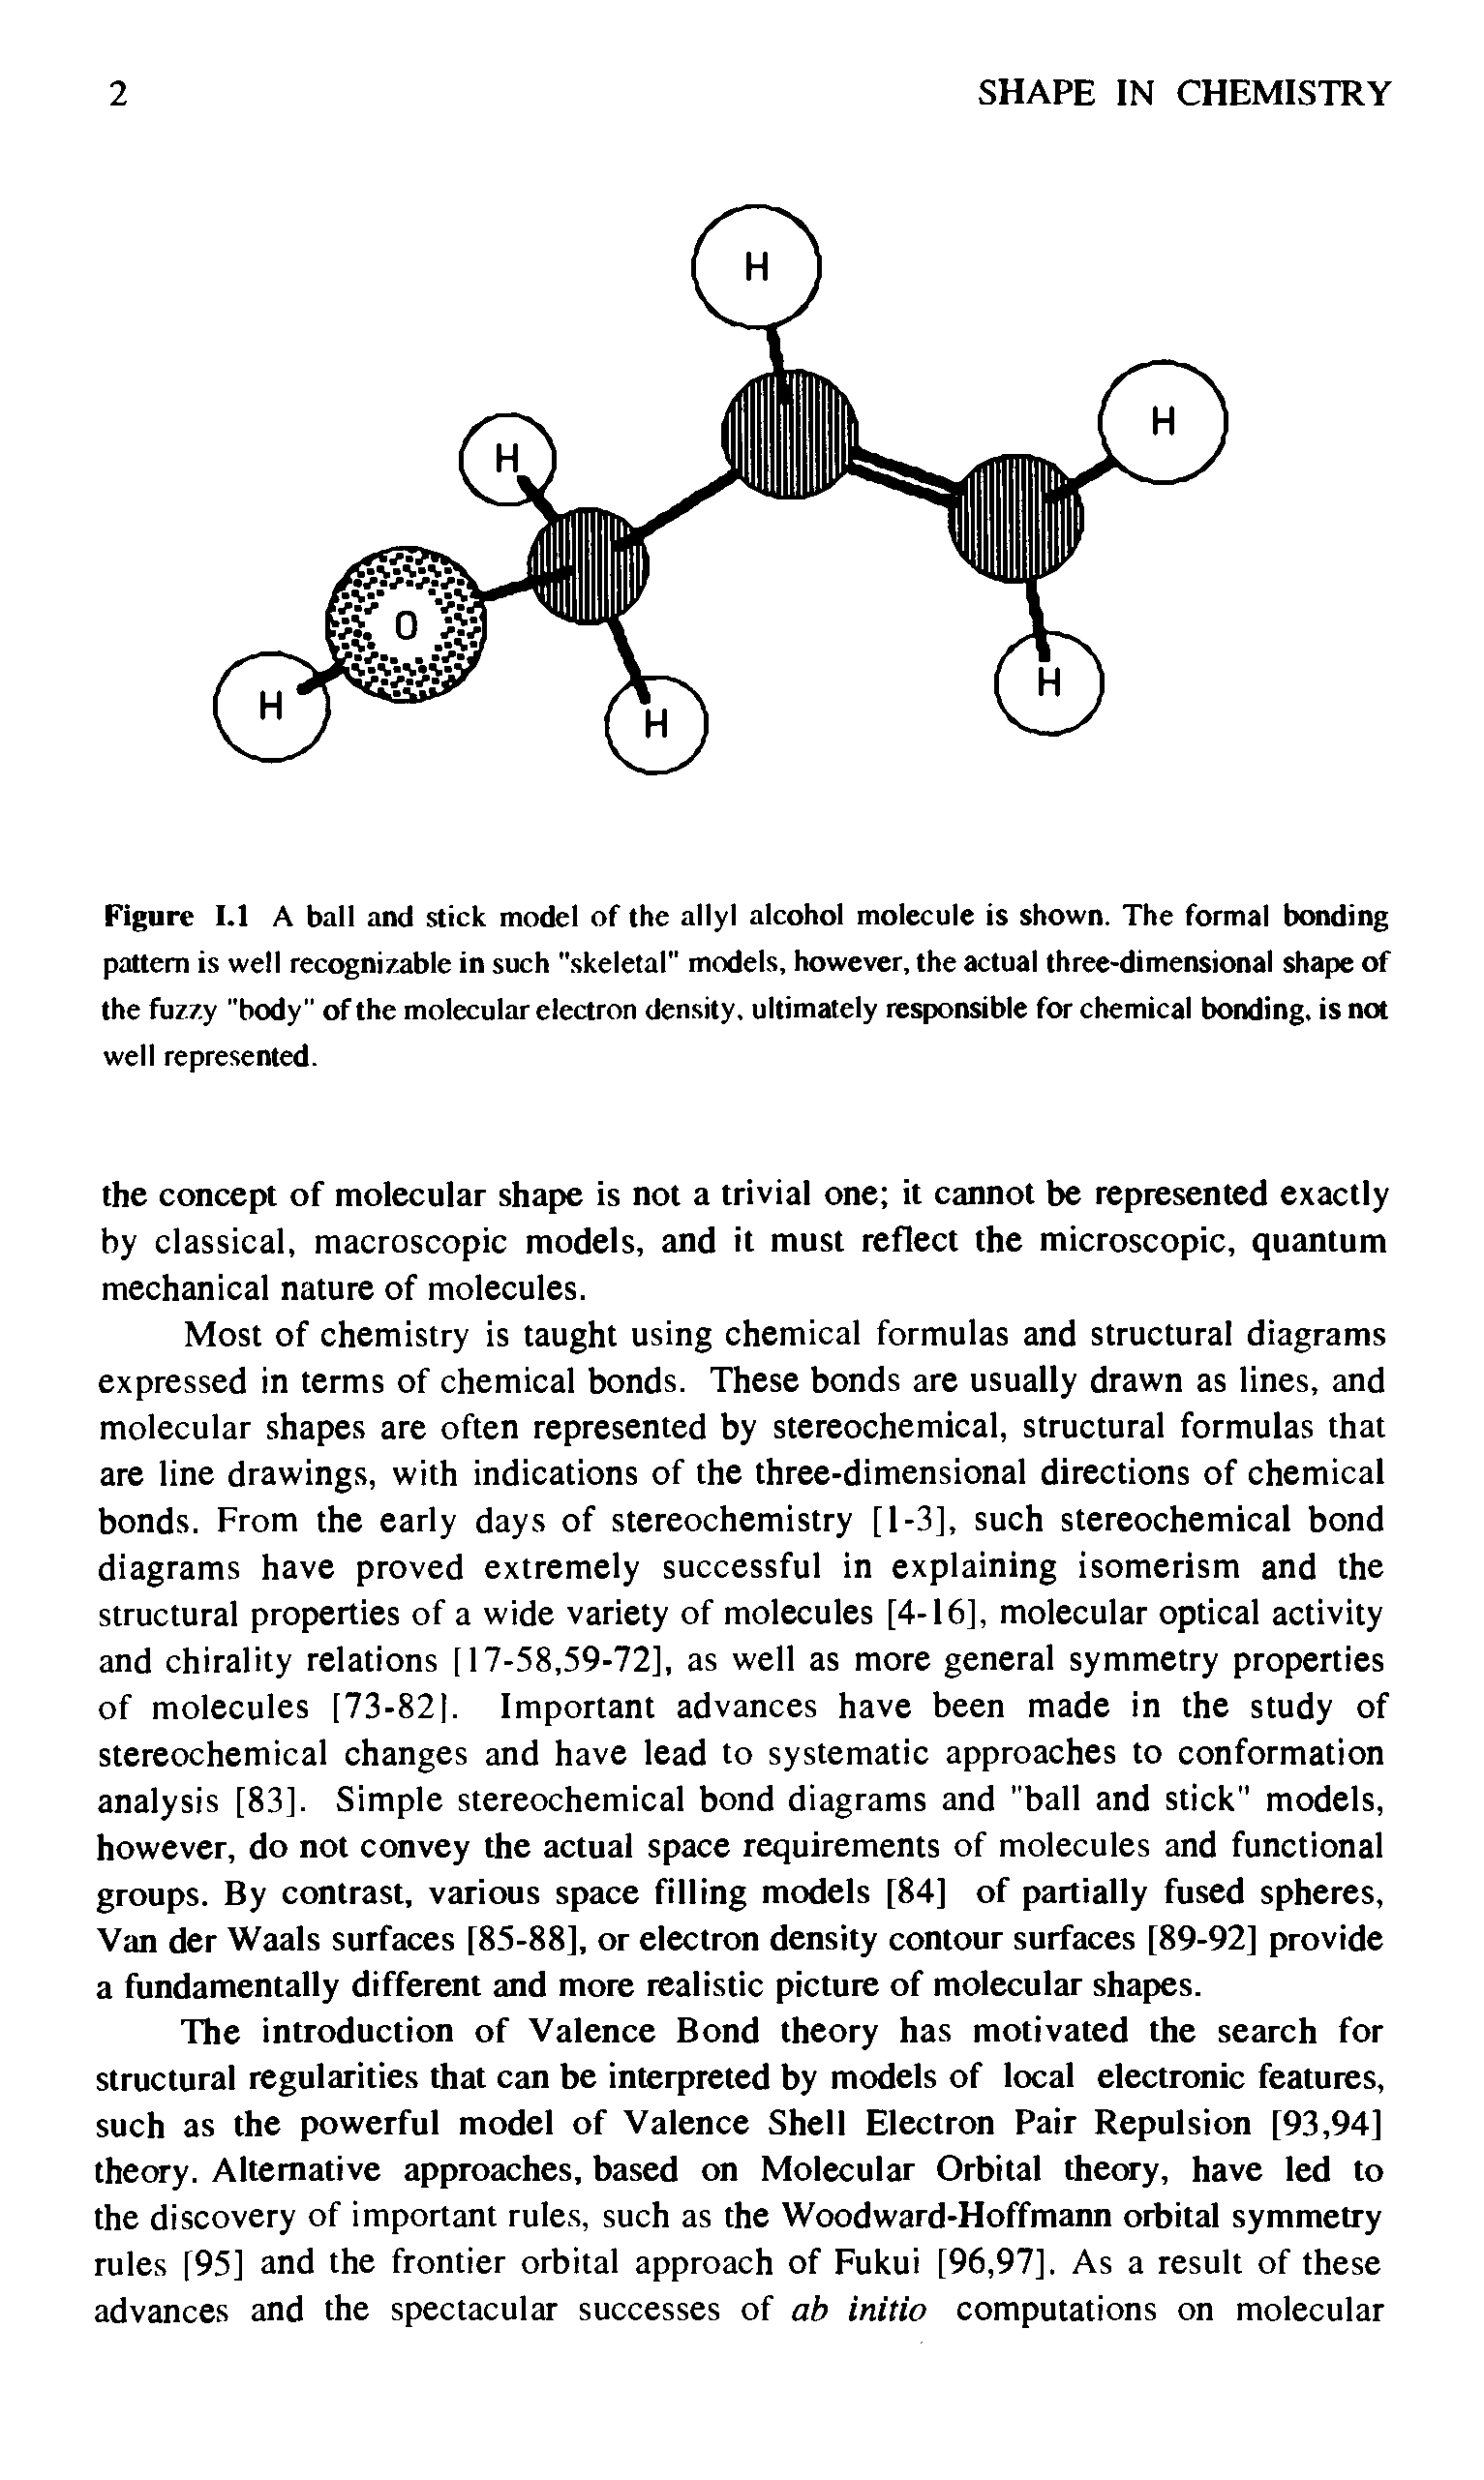 Figure I.l A ball and stick model of the allyl alcohol molecule is shown. The formal bonding pattern is well recognizable in such "skeletal" models, however, the actual three-dimensional shape of the fuzzy "body" of the molecular electron density, ultimately responsible for chemical bonding, is not well represented.